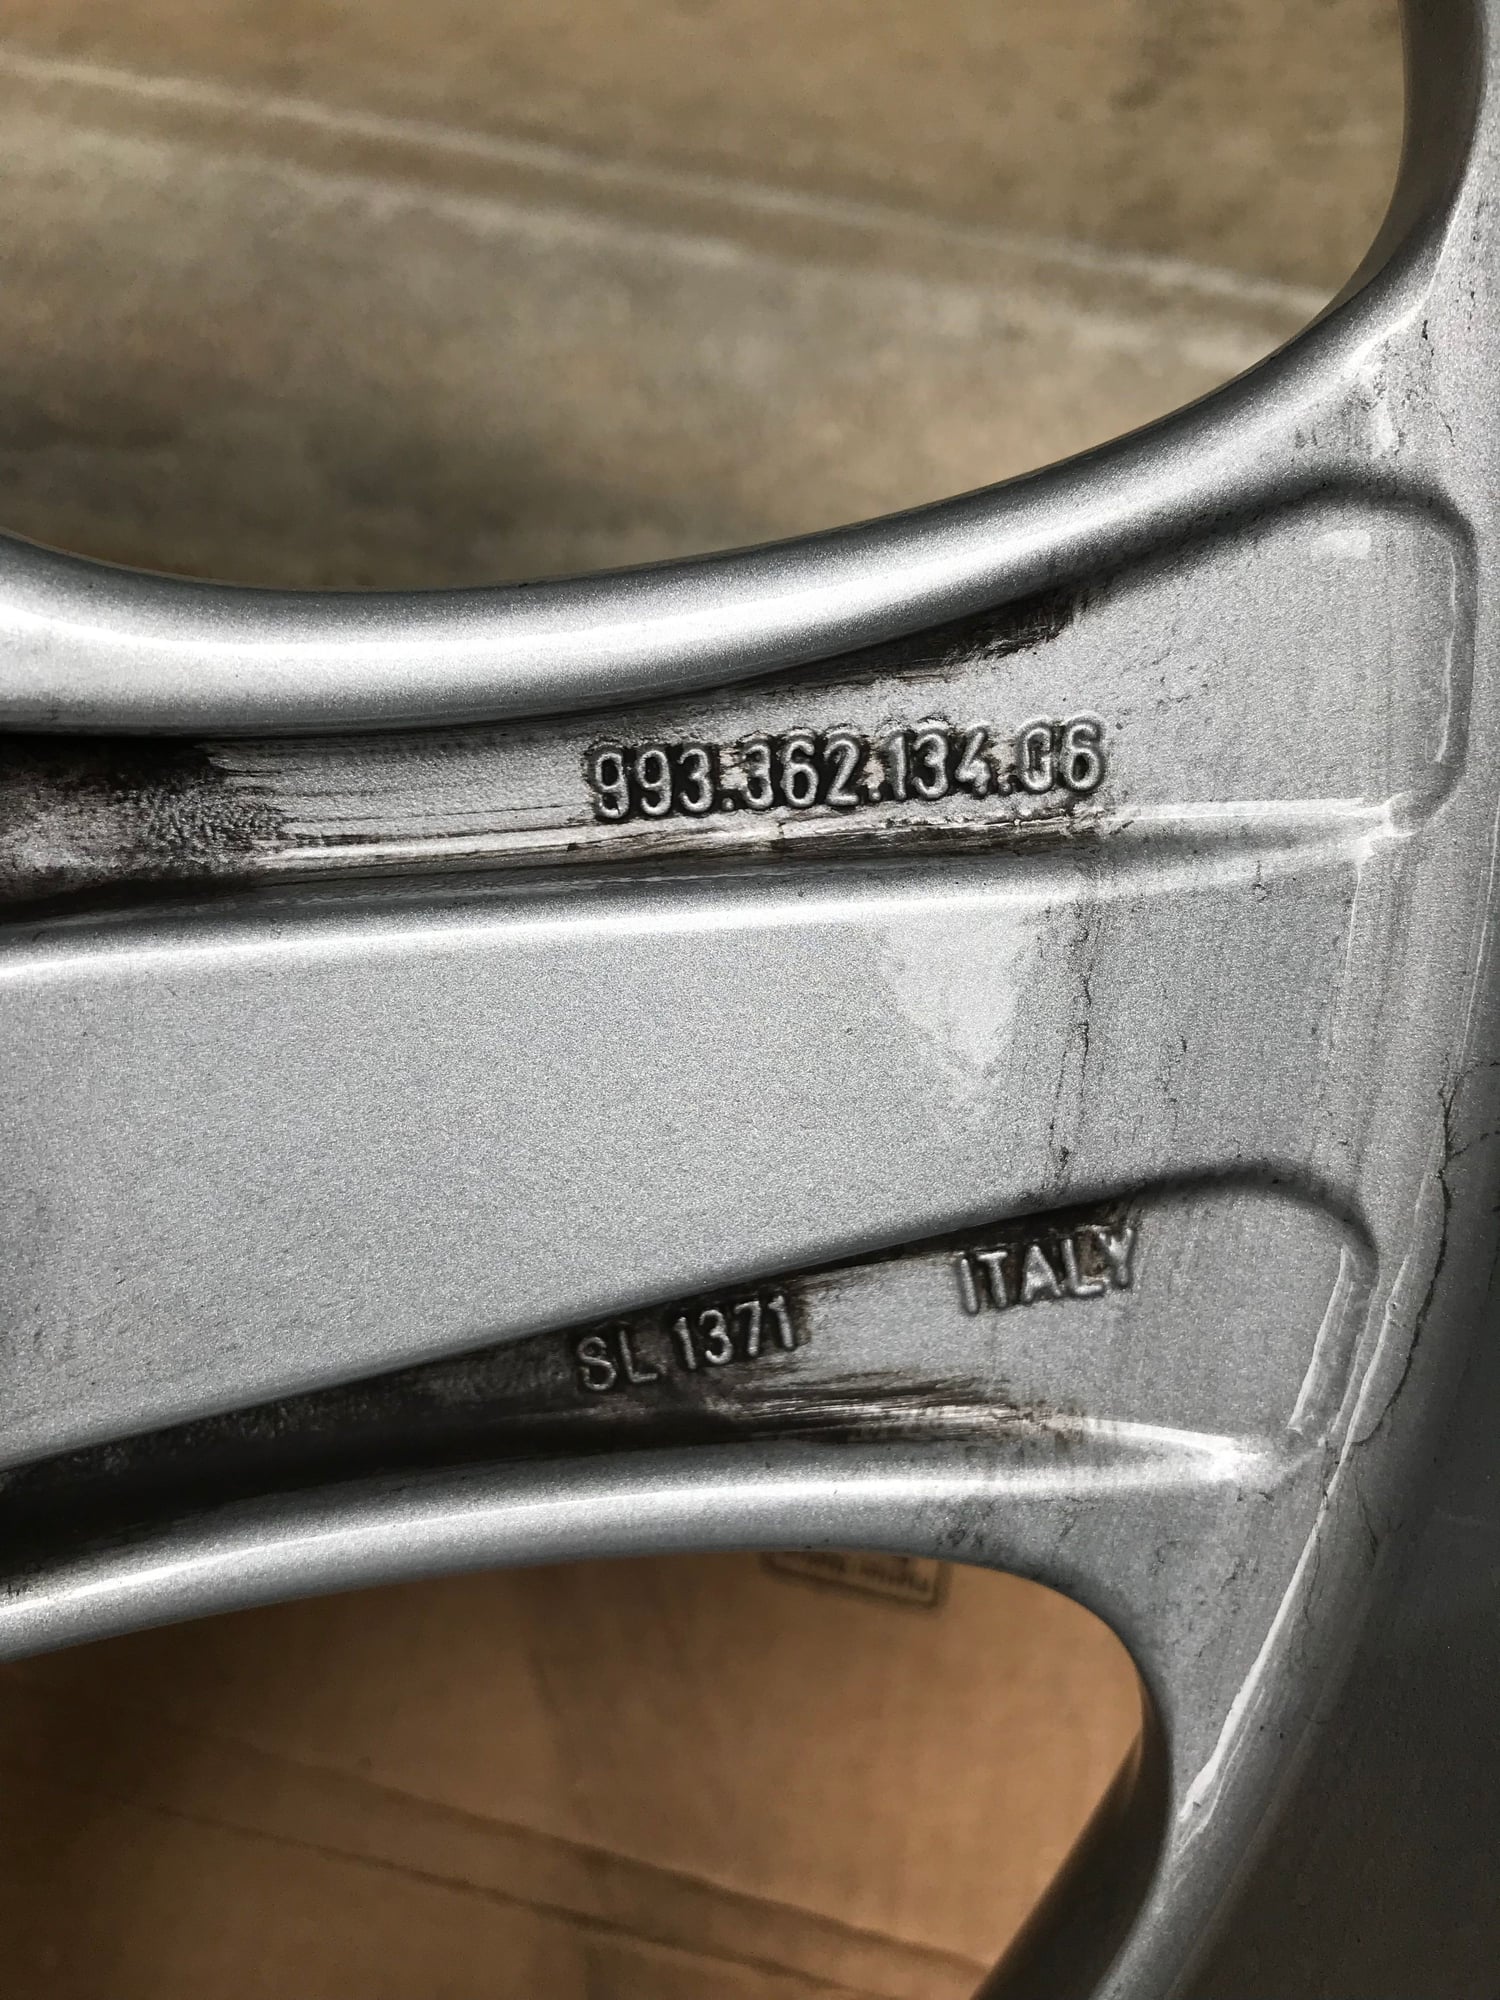 Wheels and Tires/Axles - FS: 18inch turbo twists. - Used - 1989 to 2004 Porsche 911 - Redlands, CA 92373, United States